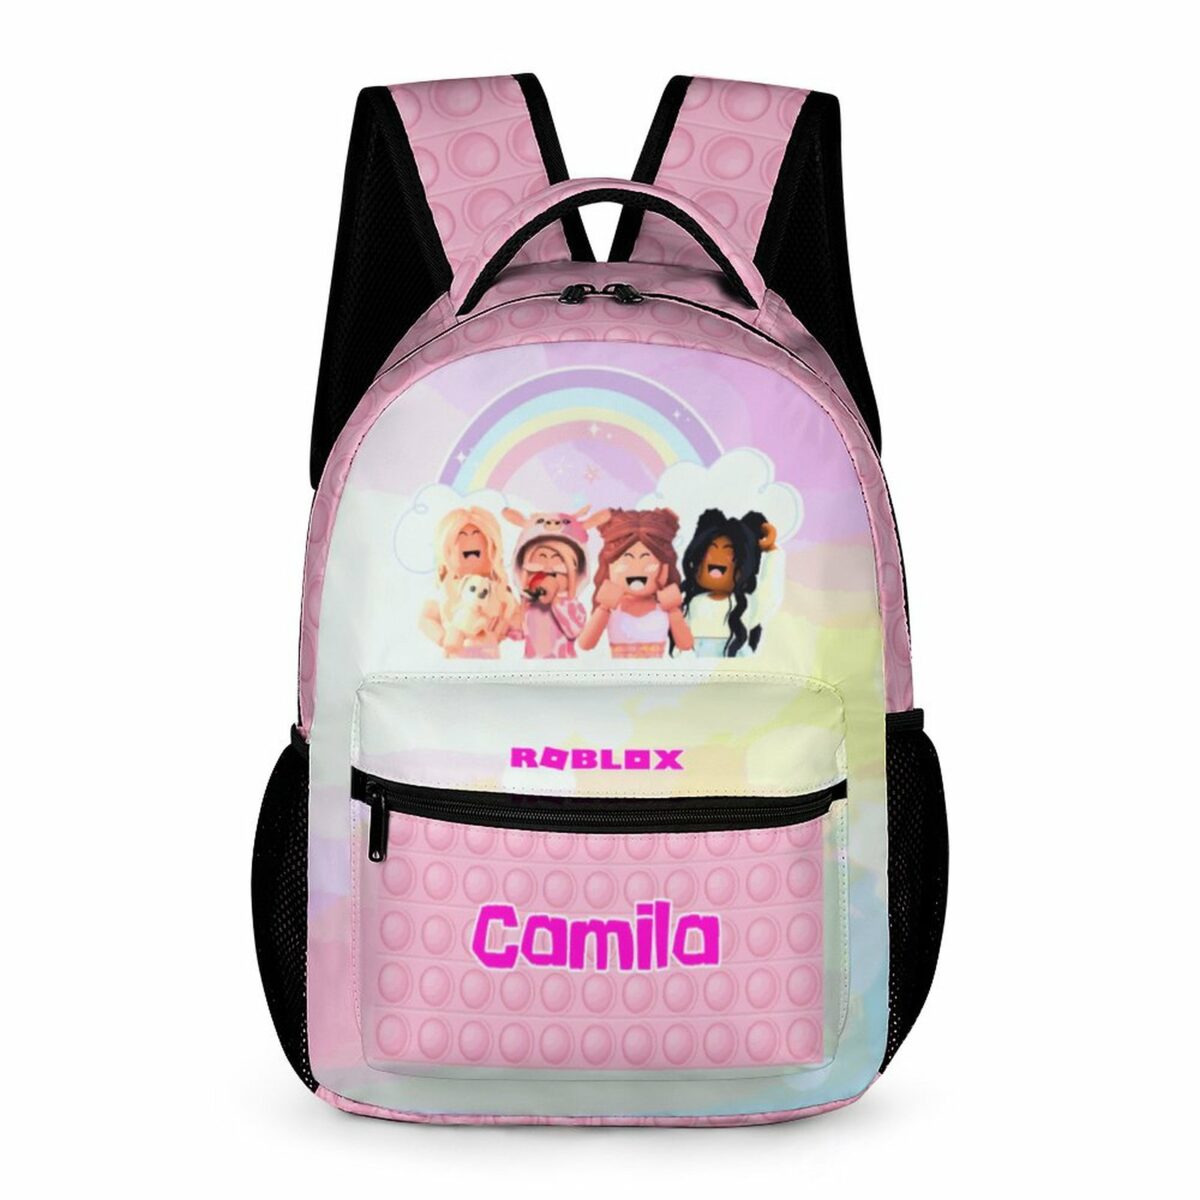 Personalized Name, Pink Roblox Girls Backpack with Avatars Characters on front Cool Kiddo 10